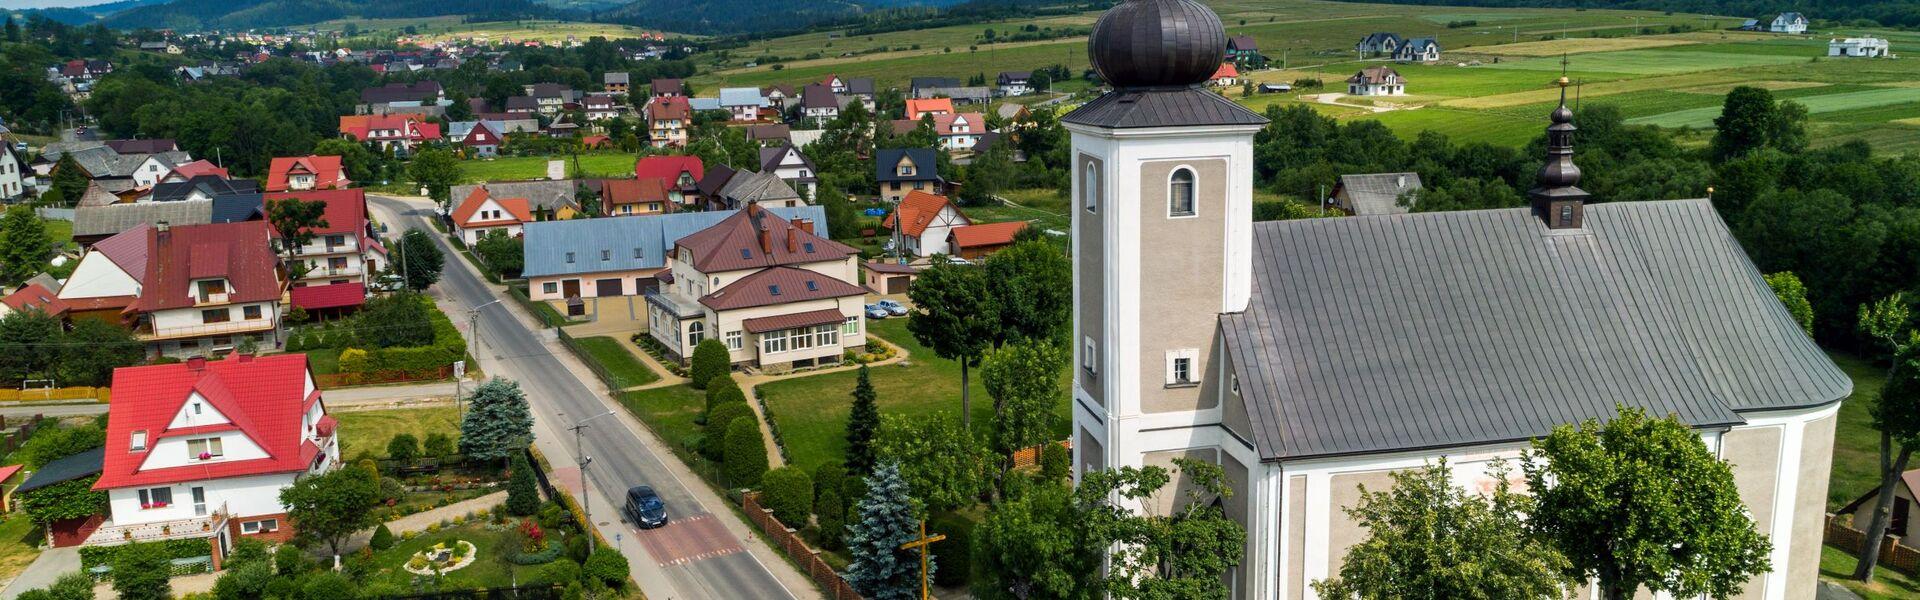 Panorama of Lipnica Wielka from a bird’s eye view, in the foreground the brick Church of St Luke the Evangelist, Babia Góra on the horizon.